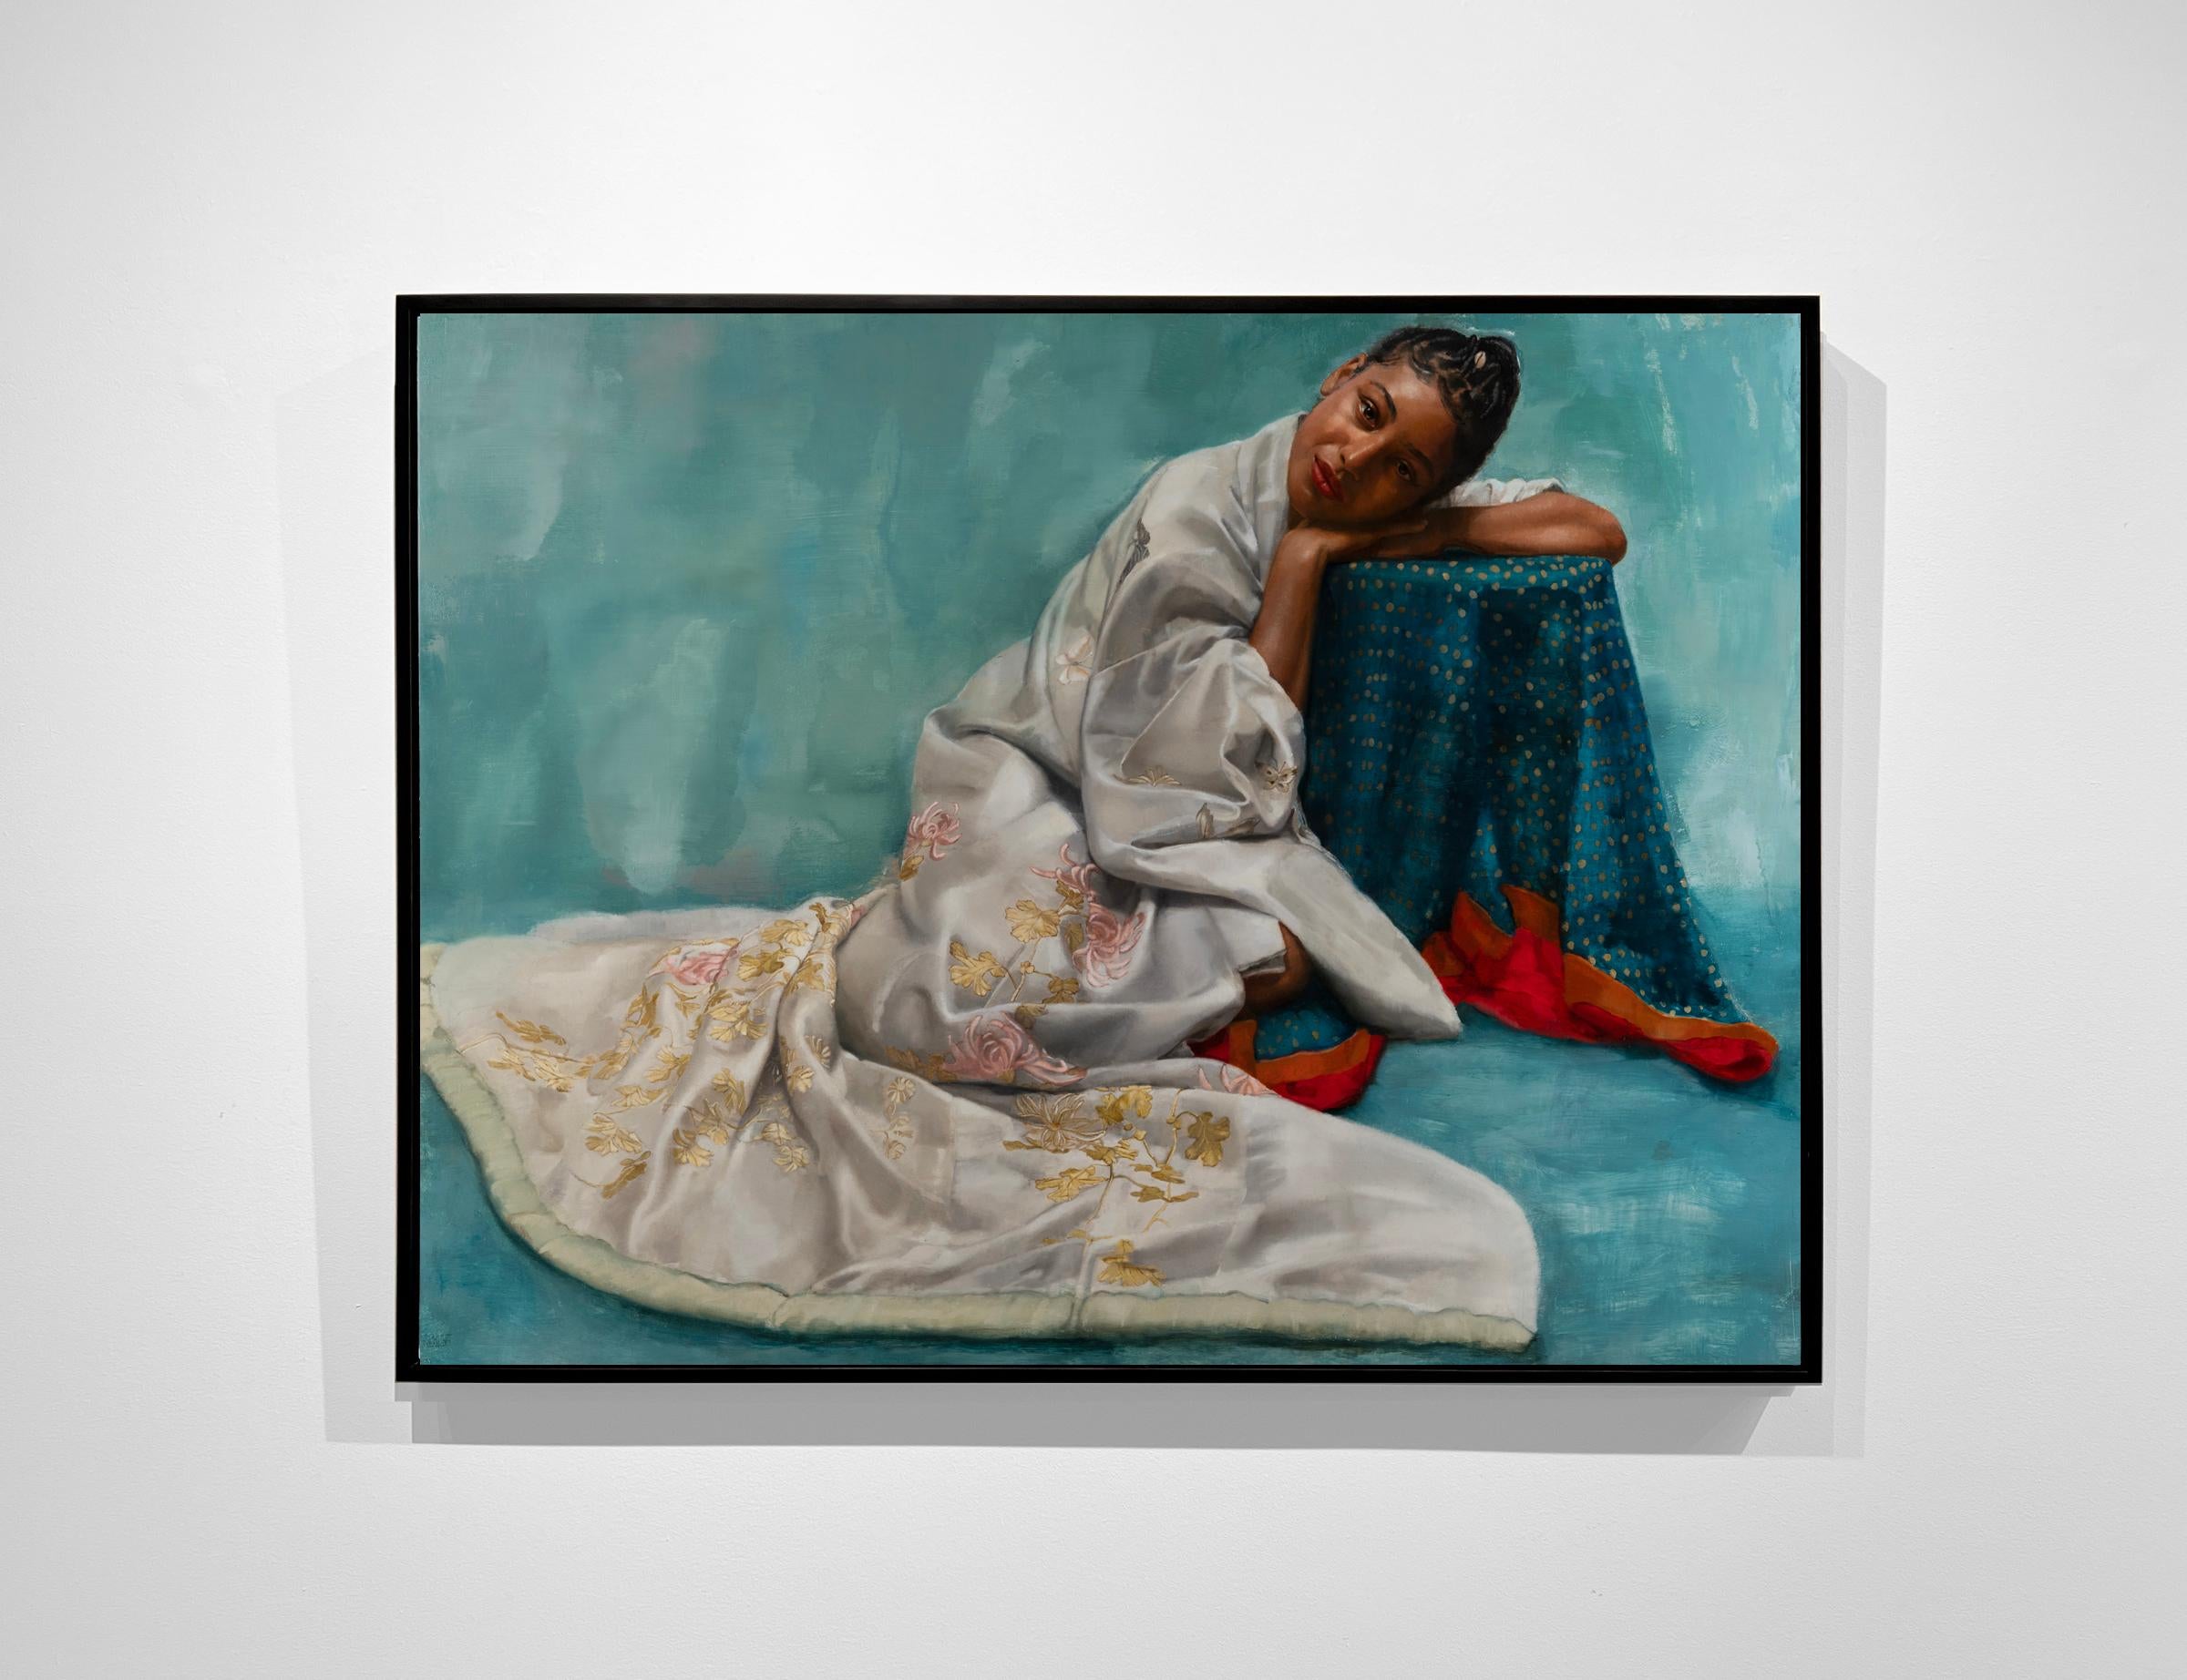 ANGLE OF REPOSE, figurative painting, figure sitting, lush color, vivid detail - Painting by Sharon Sprung